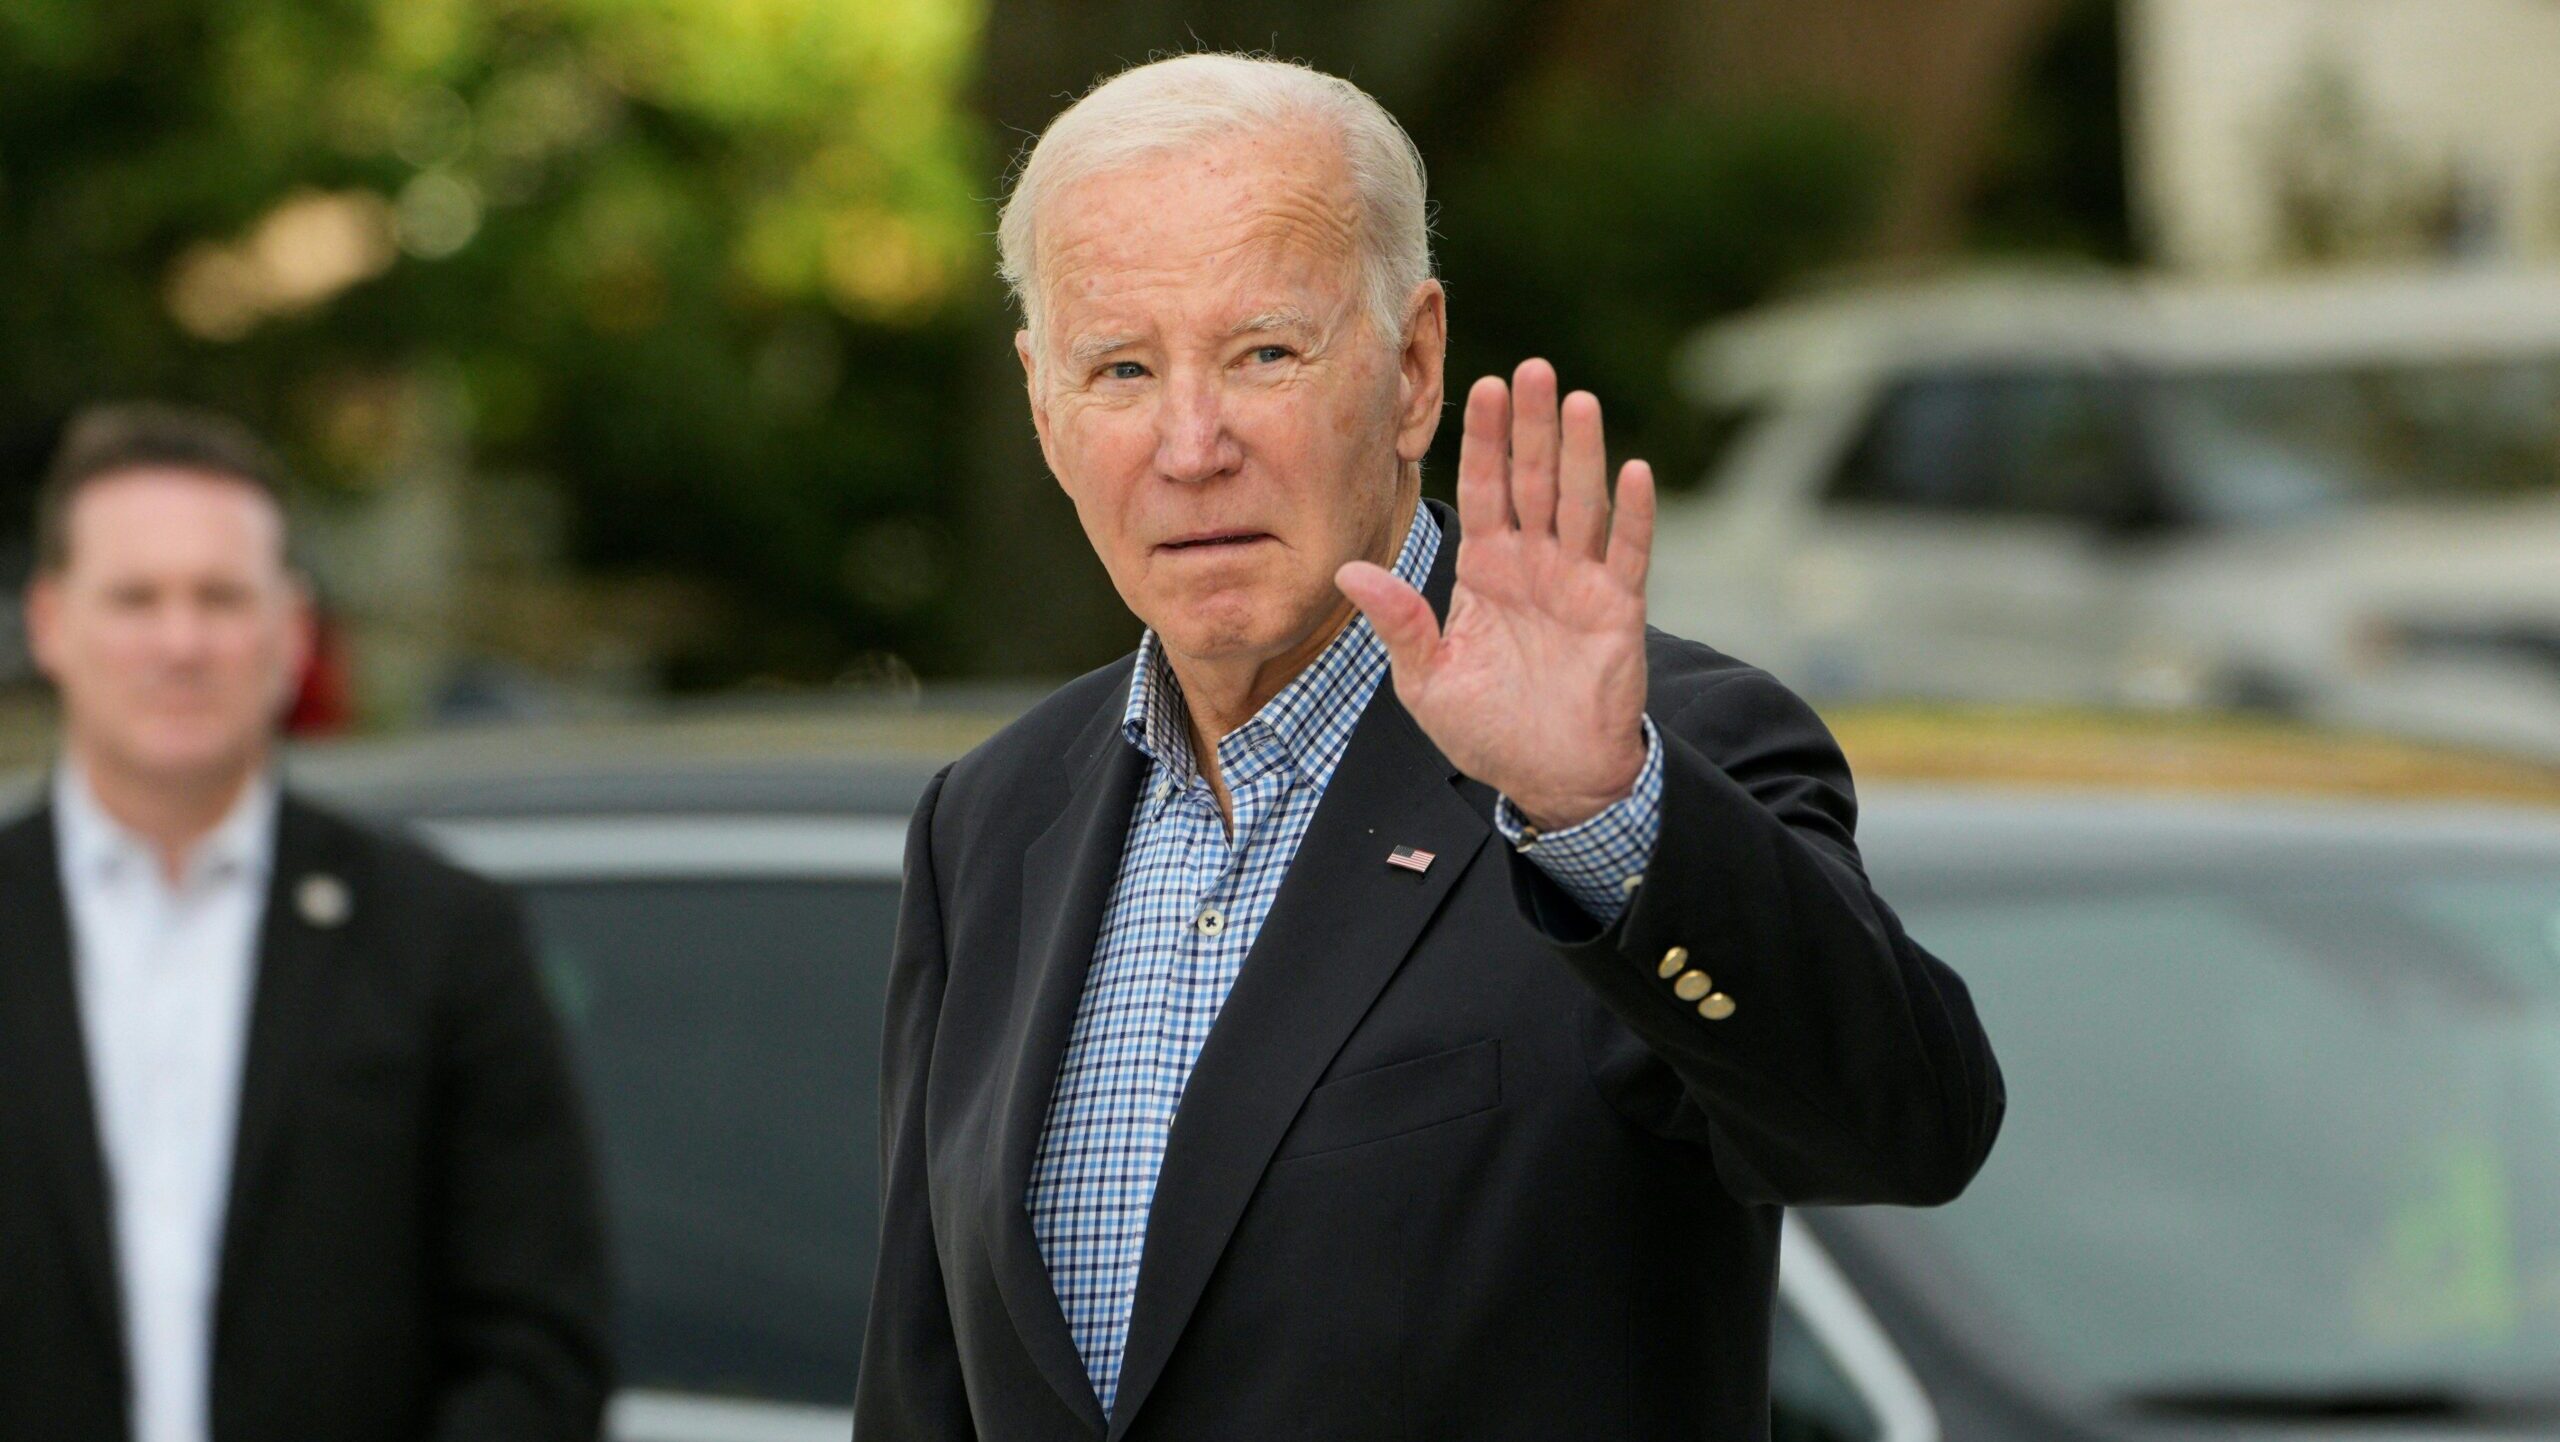 Mixed Signals: Biden’s Cease-fire Optimism Clashes With Israeli and Hamas Concerns